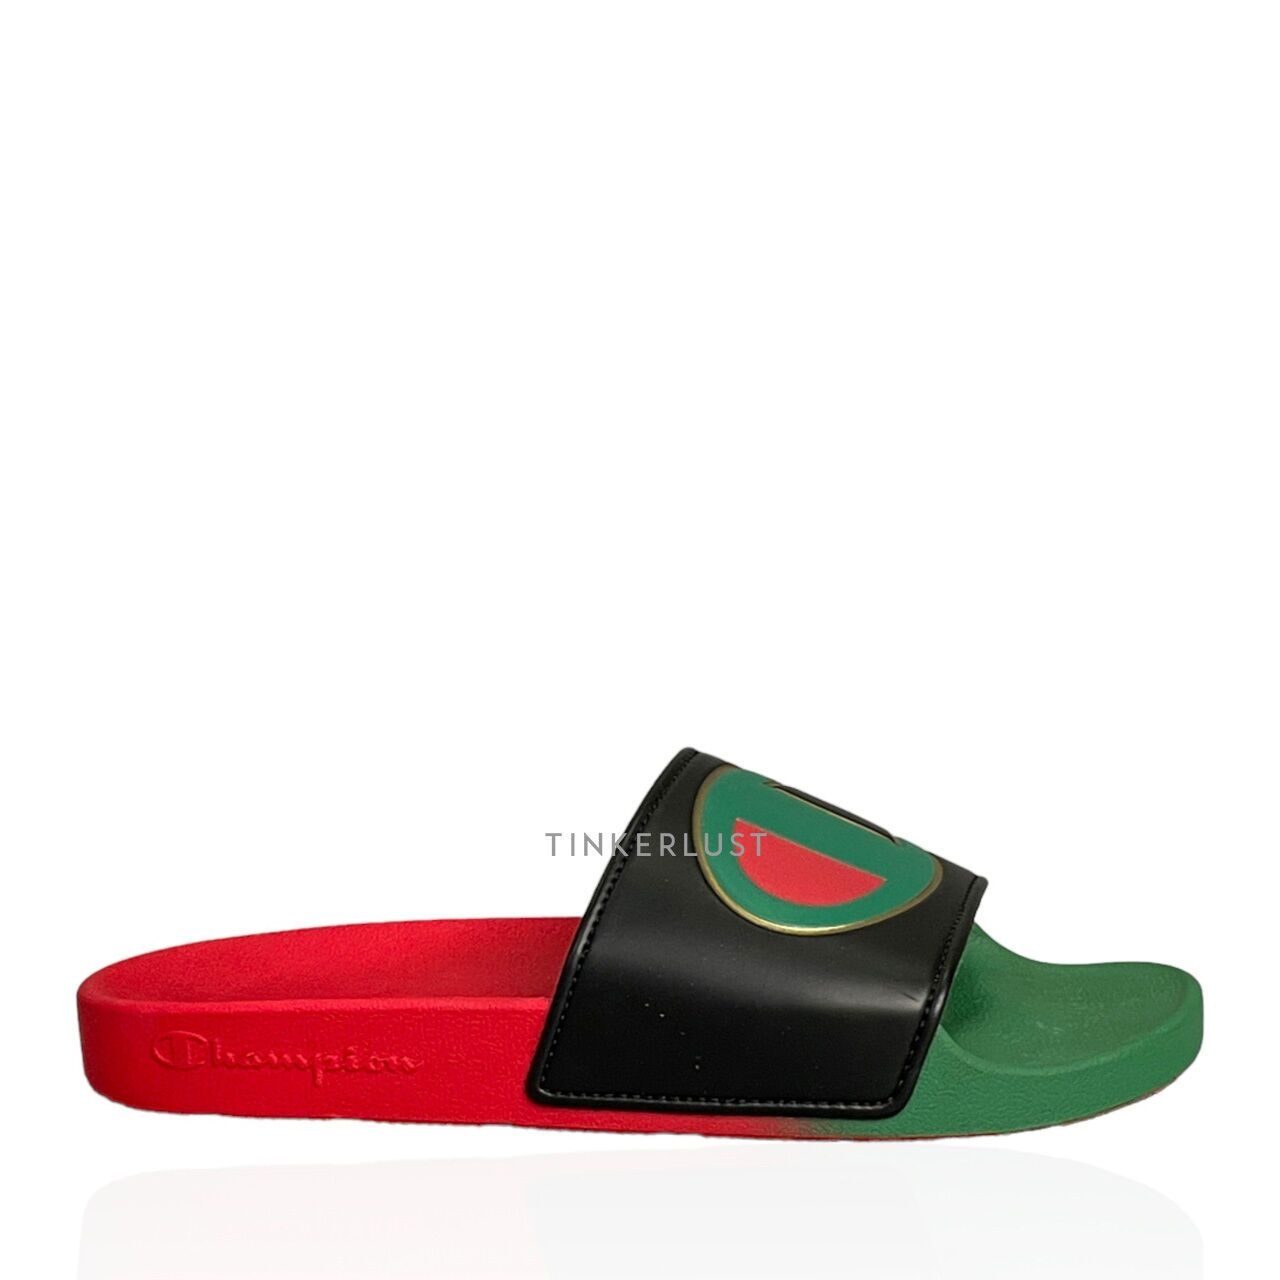 Champion Green & Red Sandals